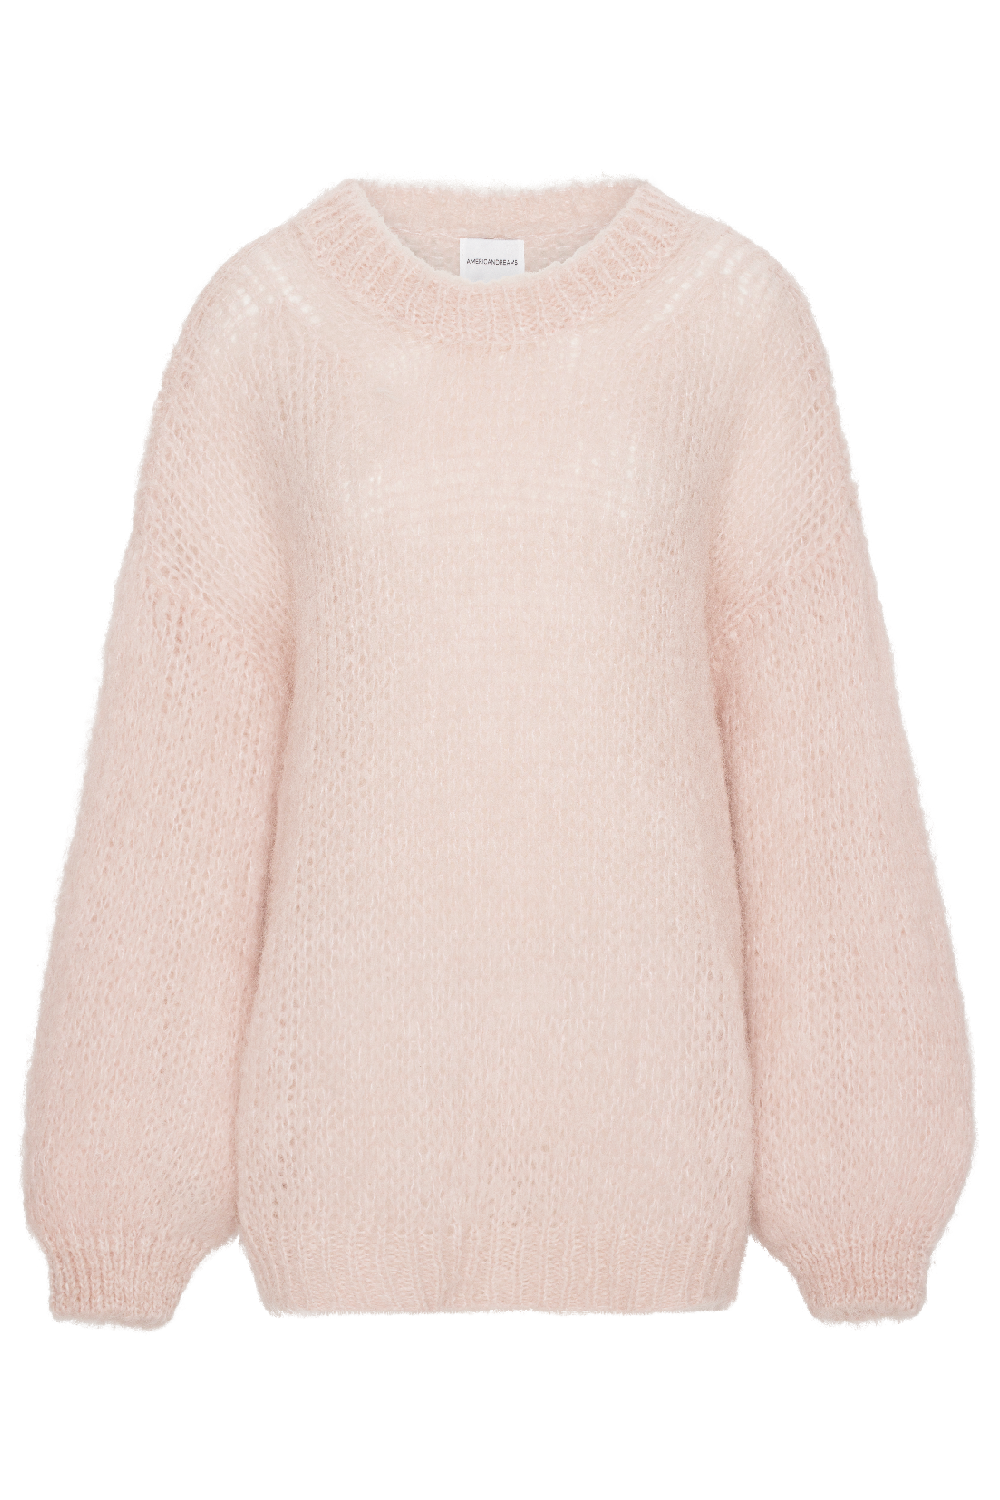 Pepper Round Neck Pullover Light Pink | Americandreams